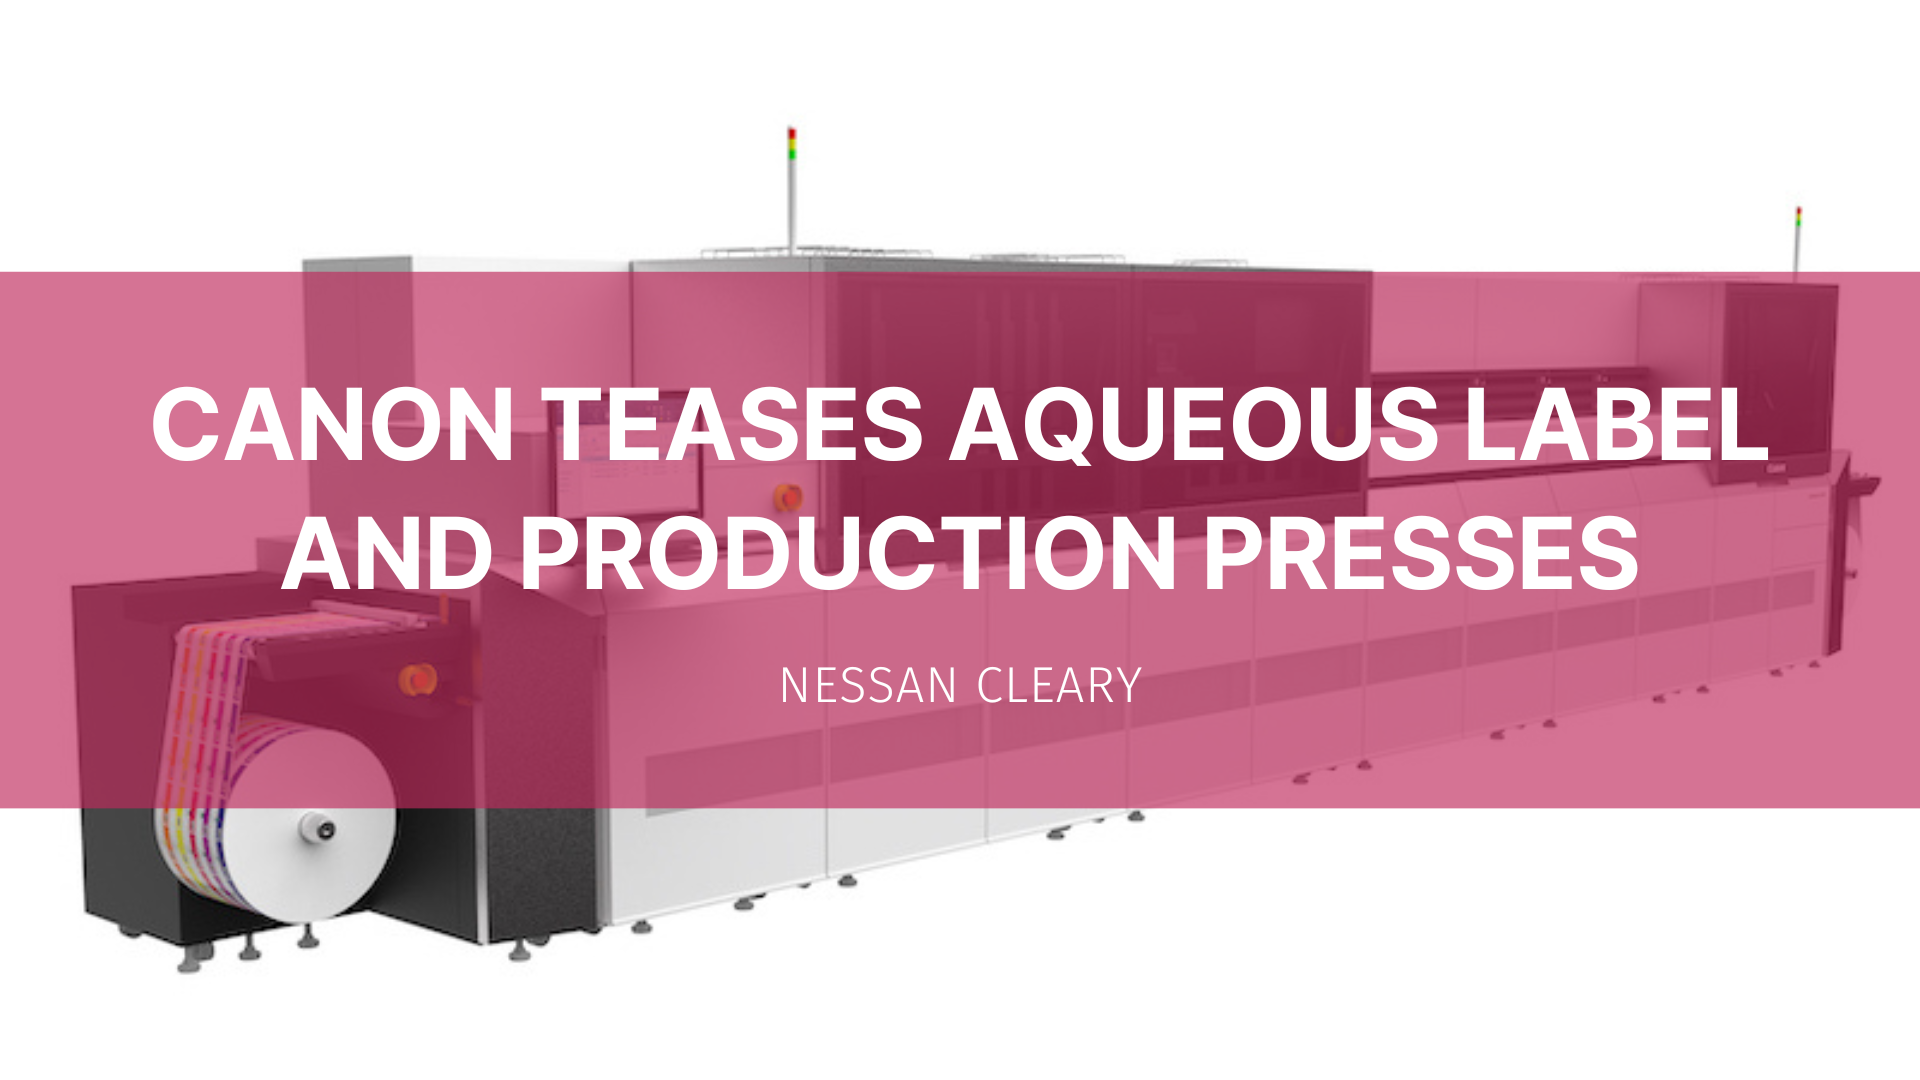 Featured image for “Canon teases aqueous label and production presses”